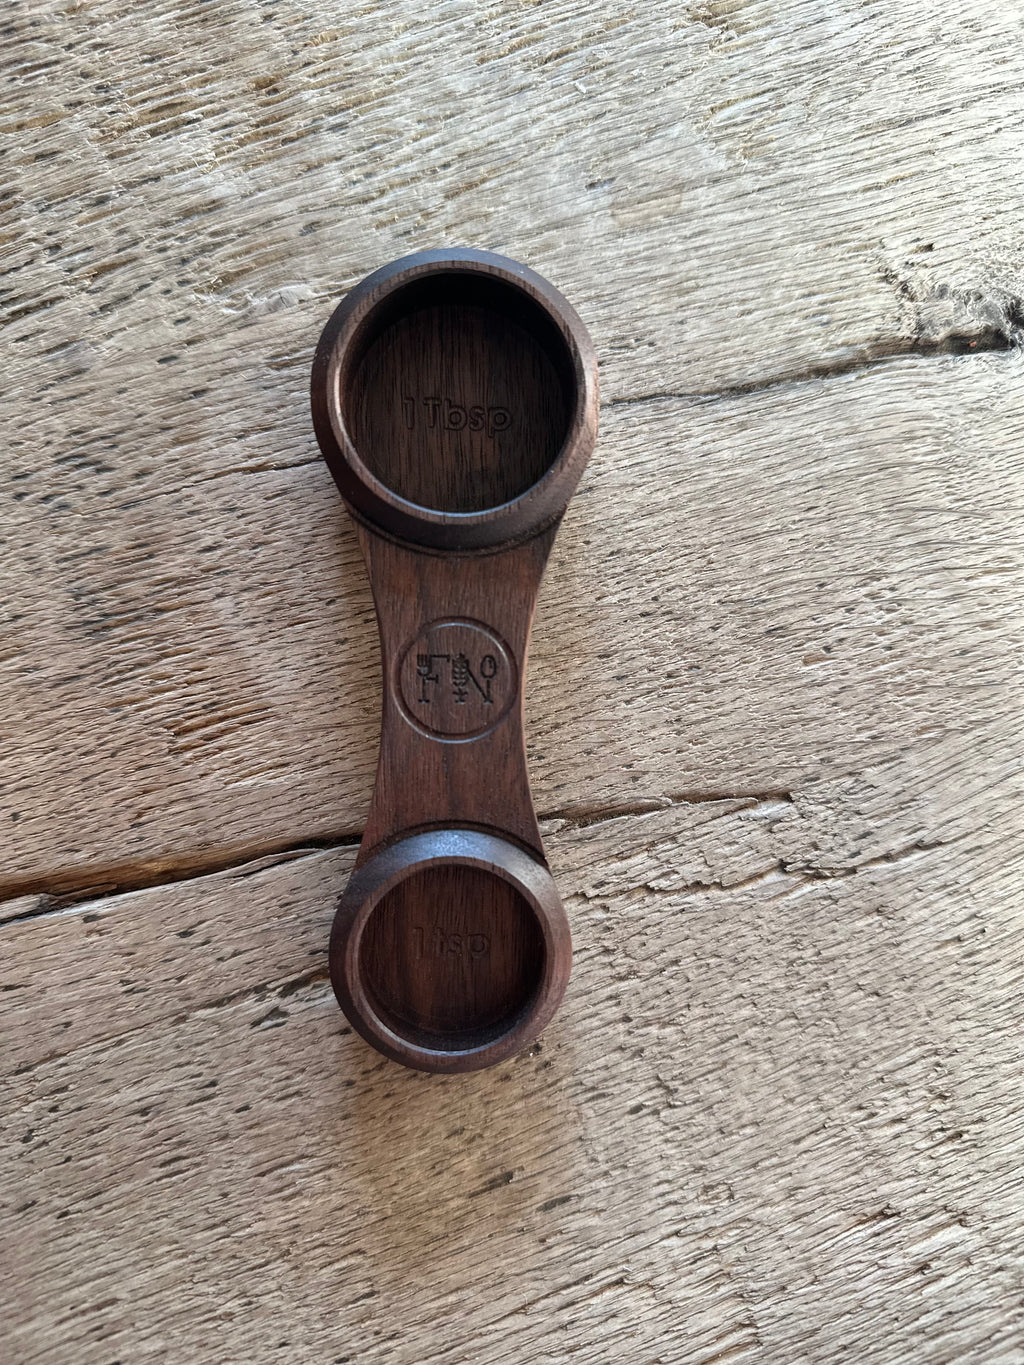 Turned these plain wooden measuring spoons into Froggy measuring spoons! :  r/cottagecore